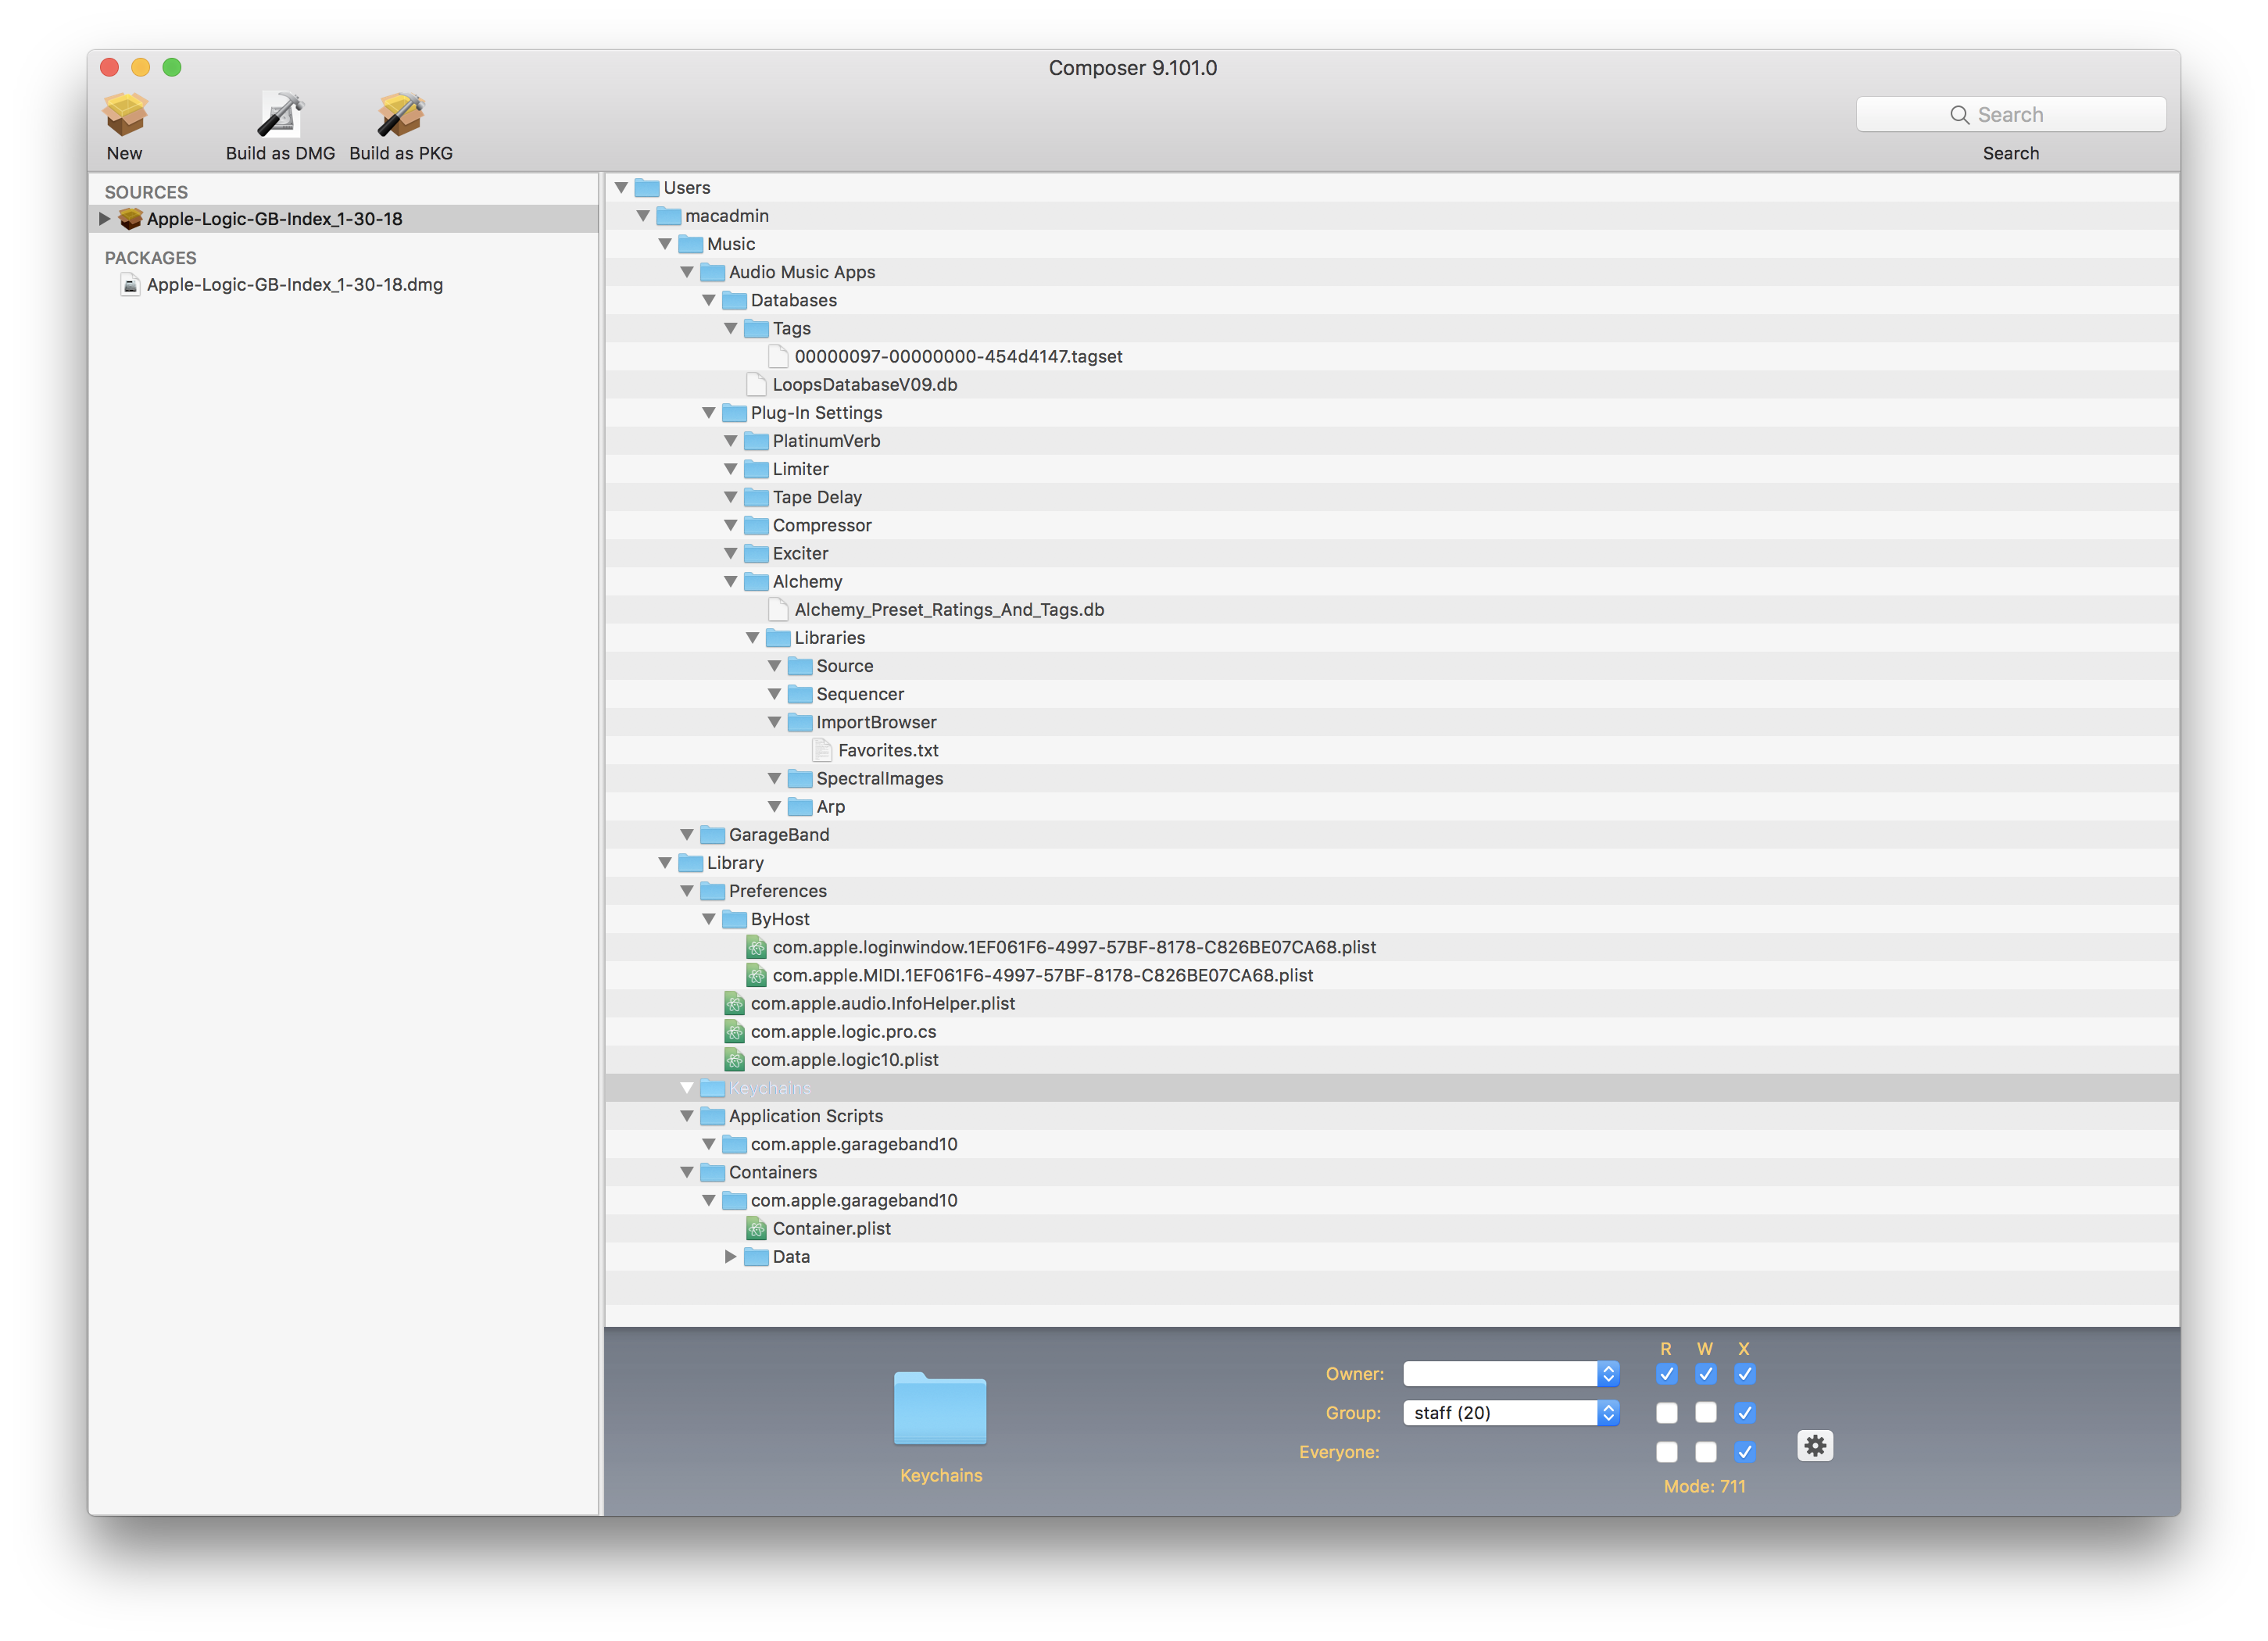 Screenshot of composer window showing files and folders expanded.